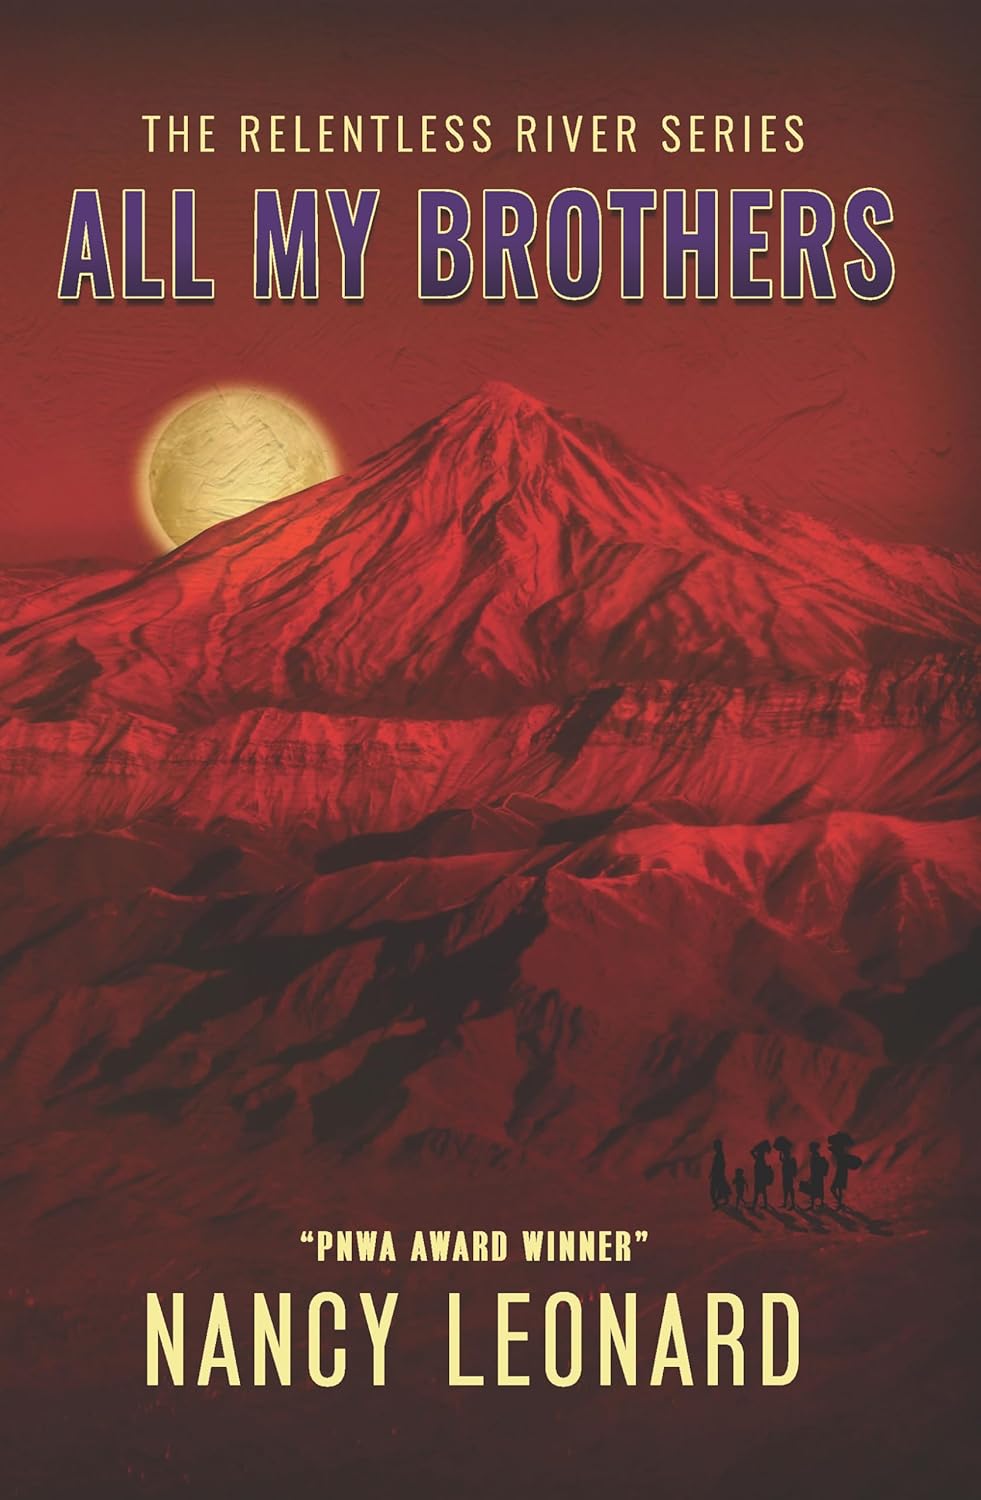 All my Brothers Book Cover by Nancy Leonard